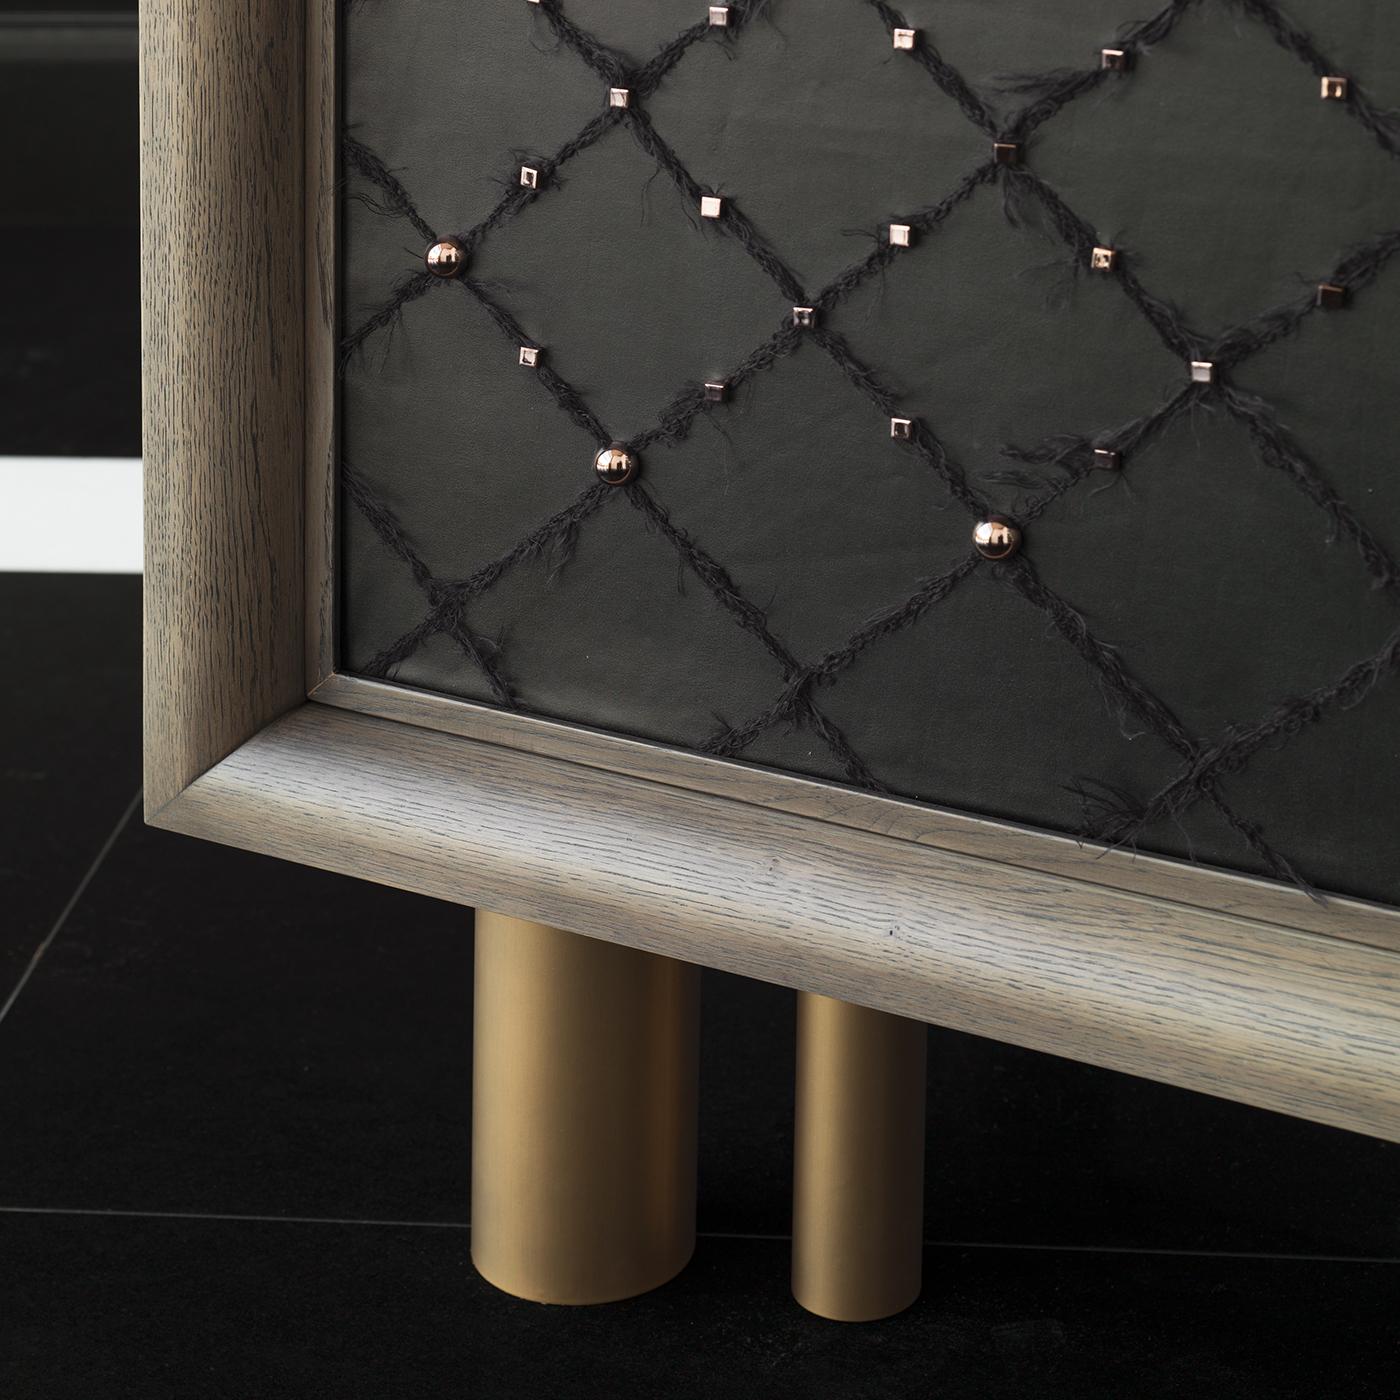 The Ivo black cabinet combines a chic contemporary frame with extravagant finishings. Handcrafted in oak, the cabinet features a cool gray finish and bronze-colored metal legs. Containing three drawers and two glass shelves with a mirrored backing,